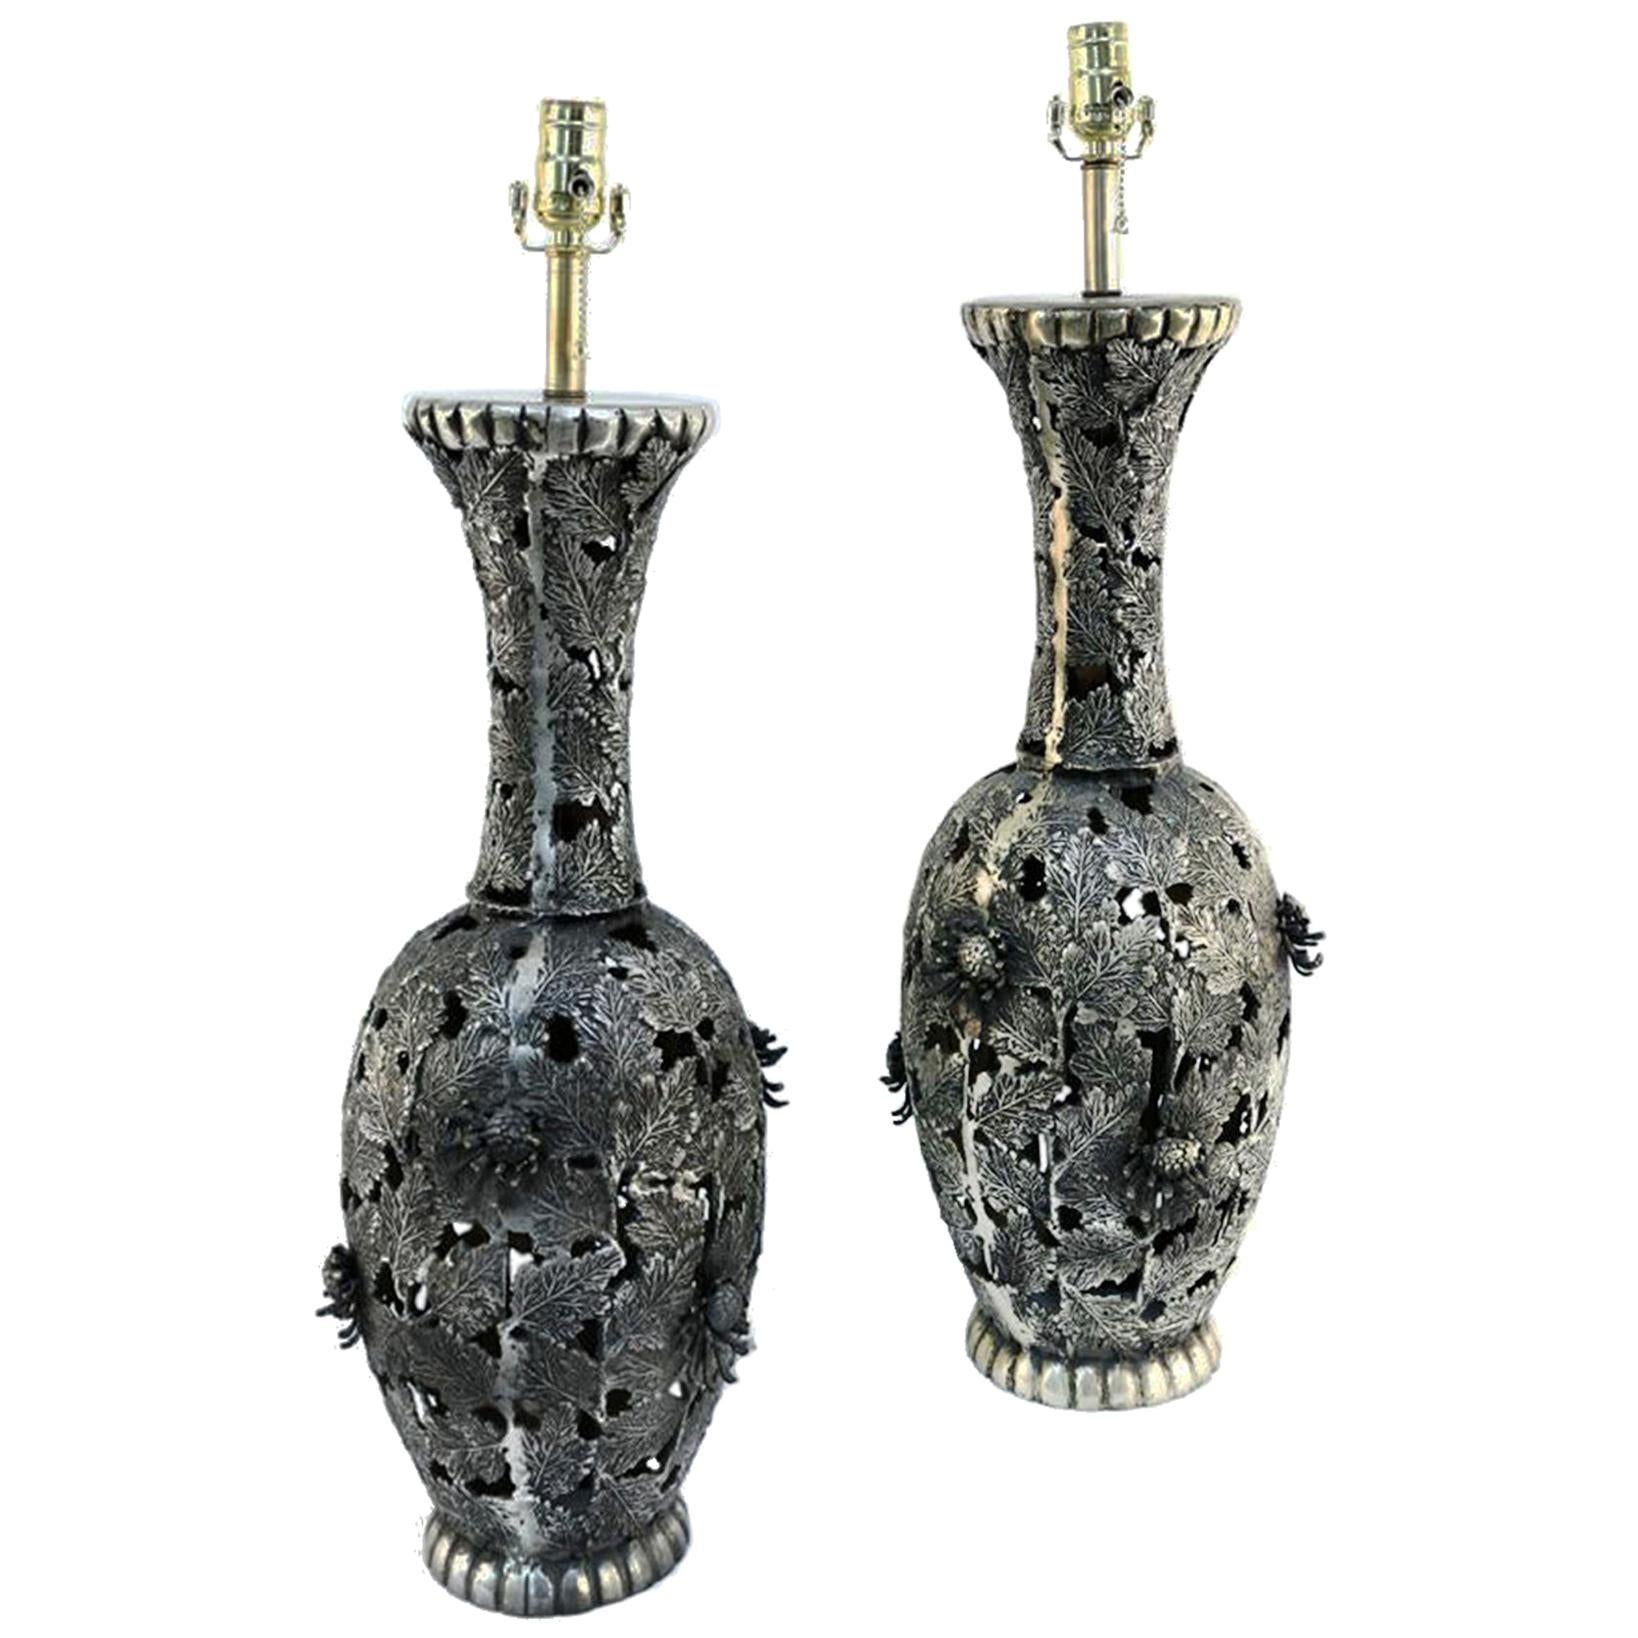 Pair of Mid-20th Century Japanese Bronze Table Lamps with Floral Lattice Design